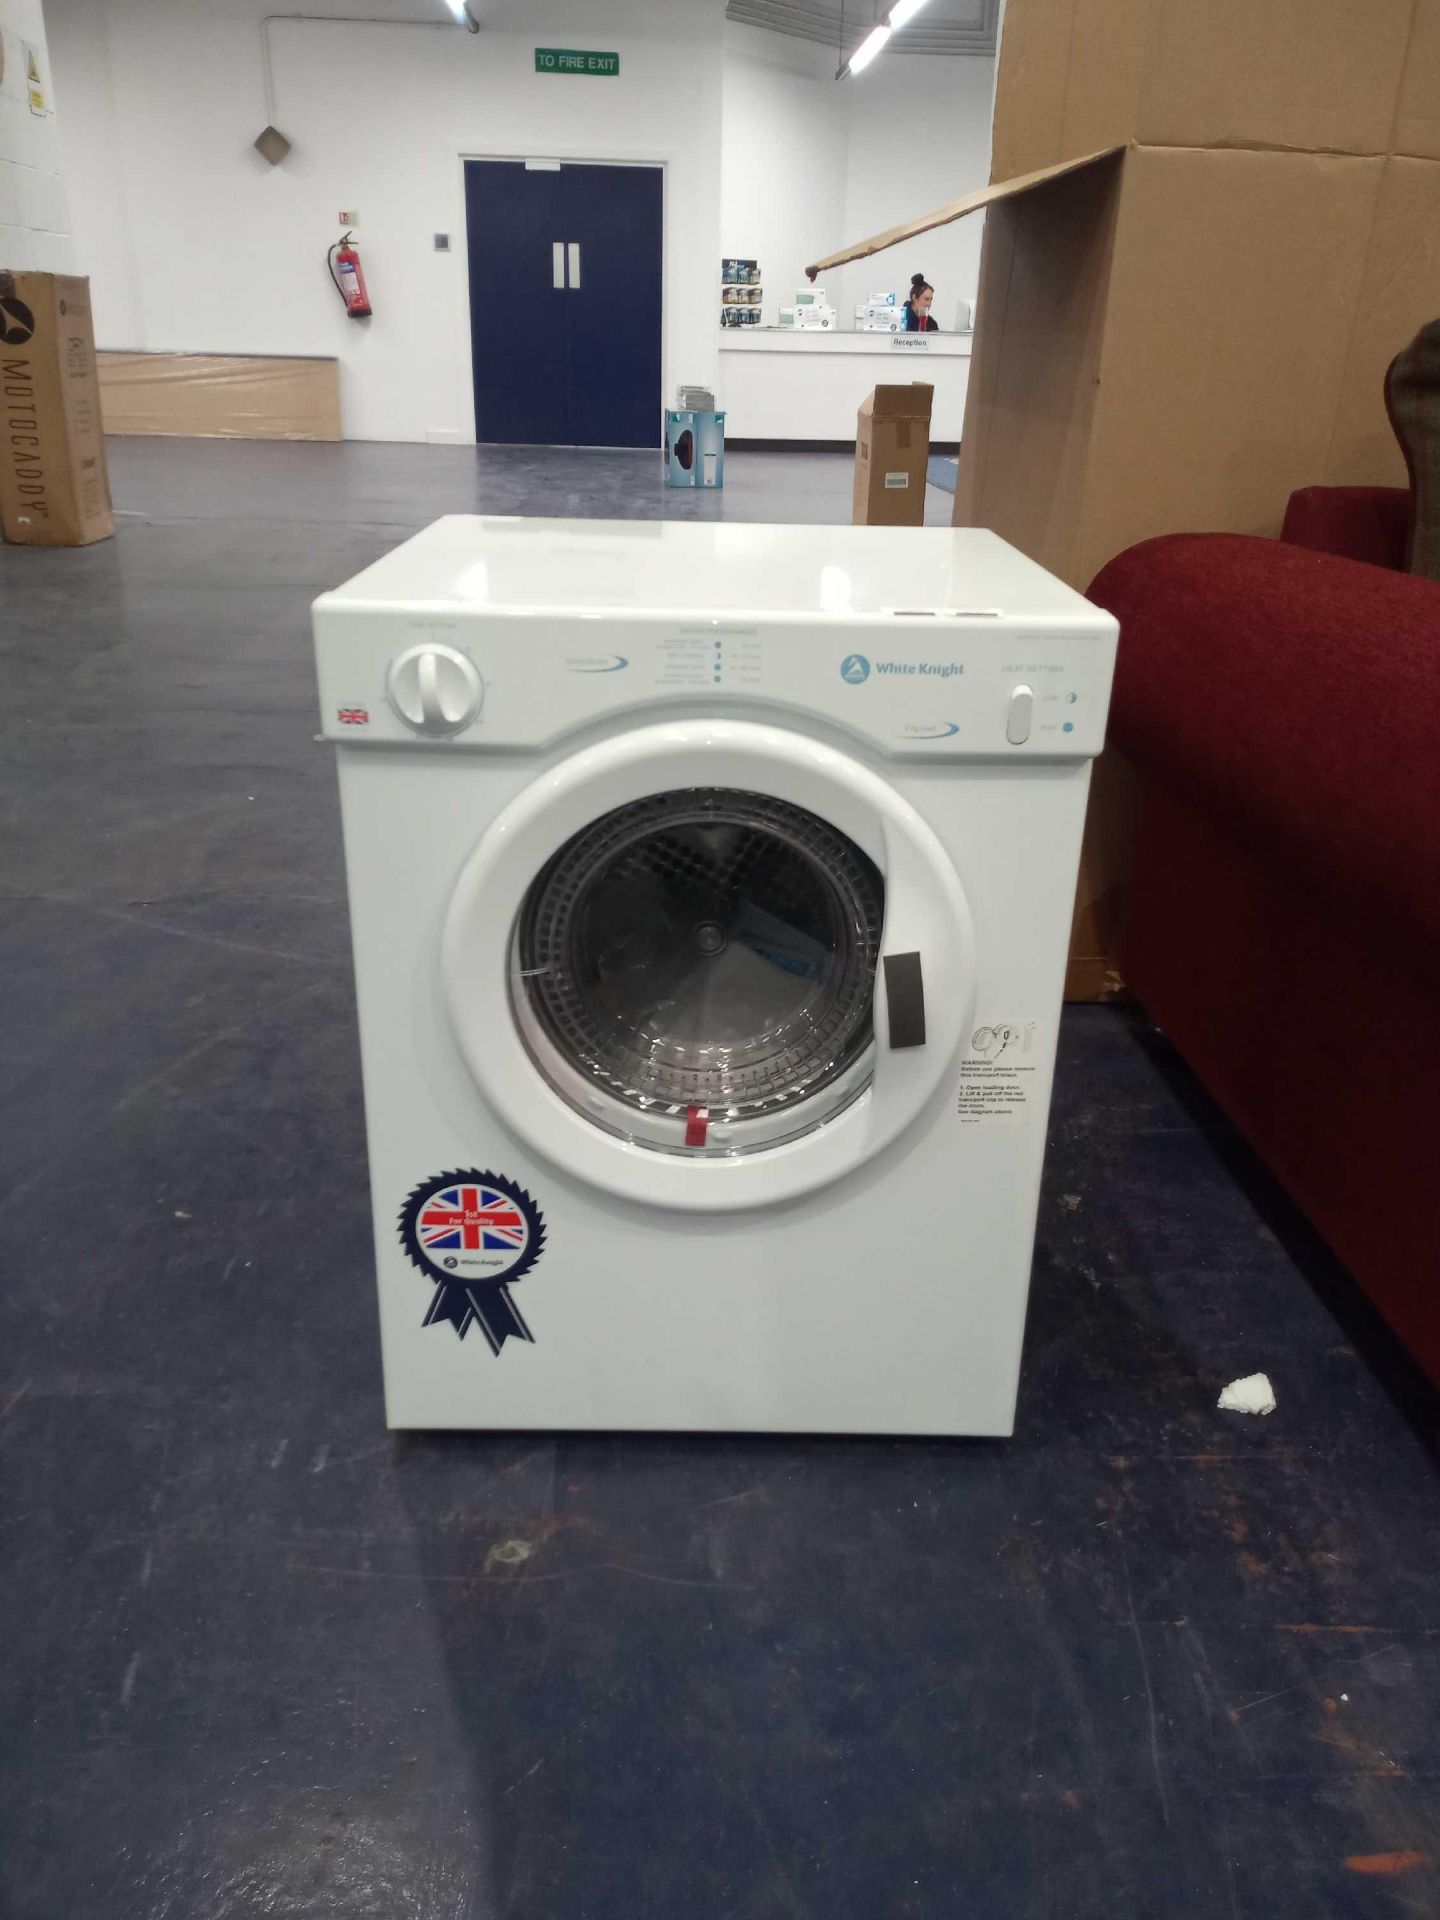 Rrp £180 Boxed Grade B White Knight C37Aw Uni Directional Tumble Dryer - Image 2 of 2